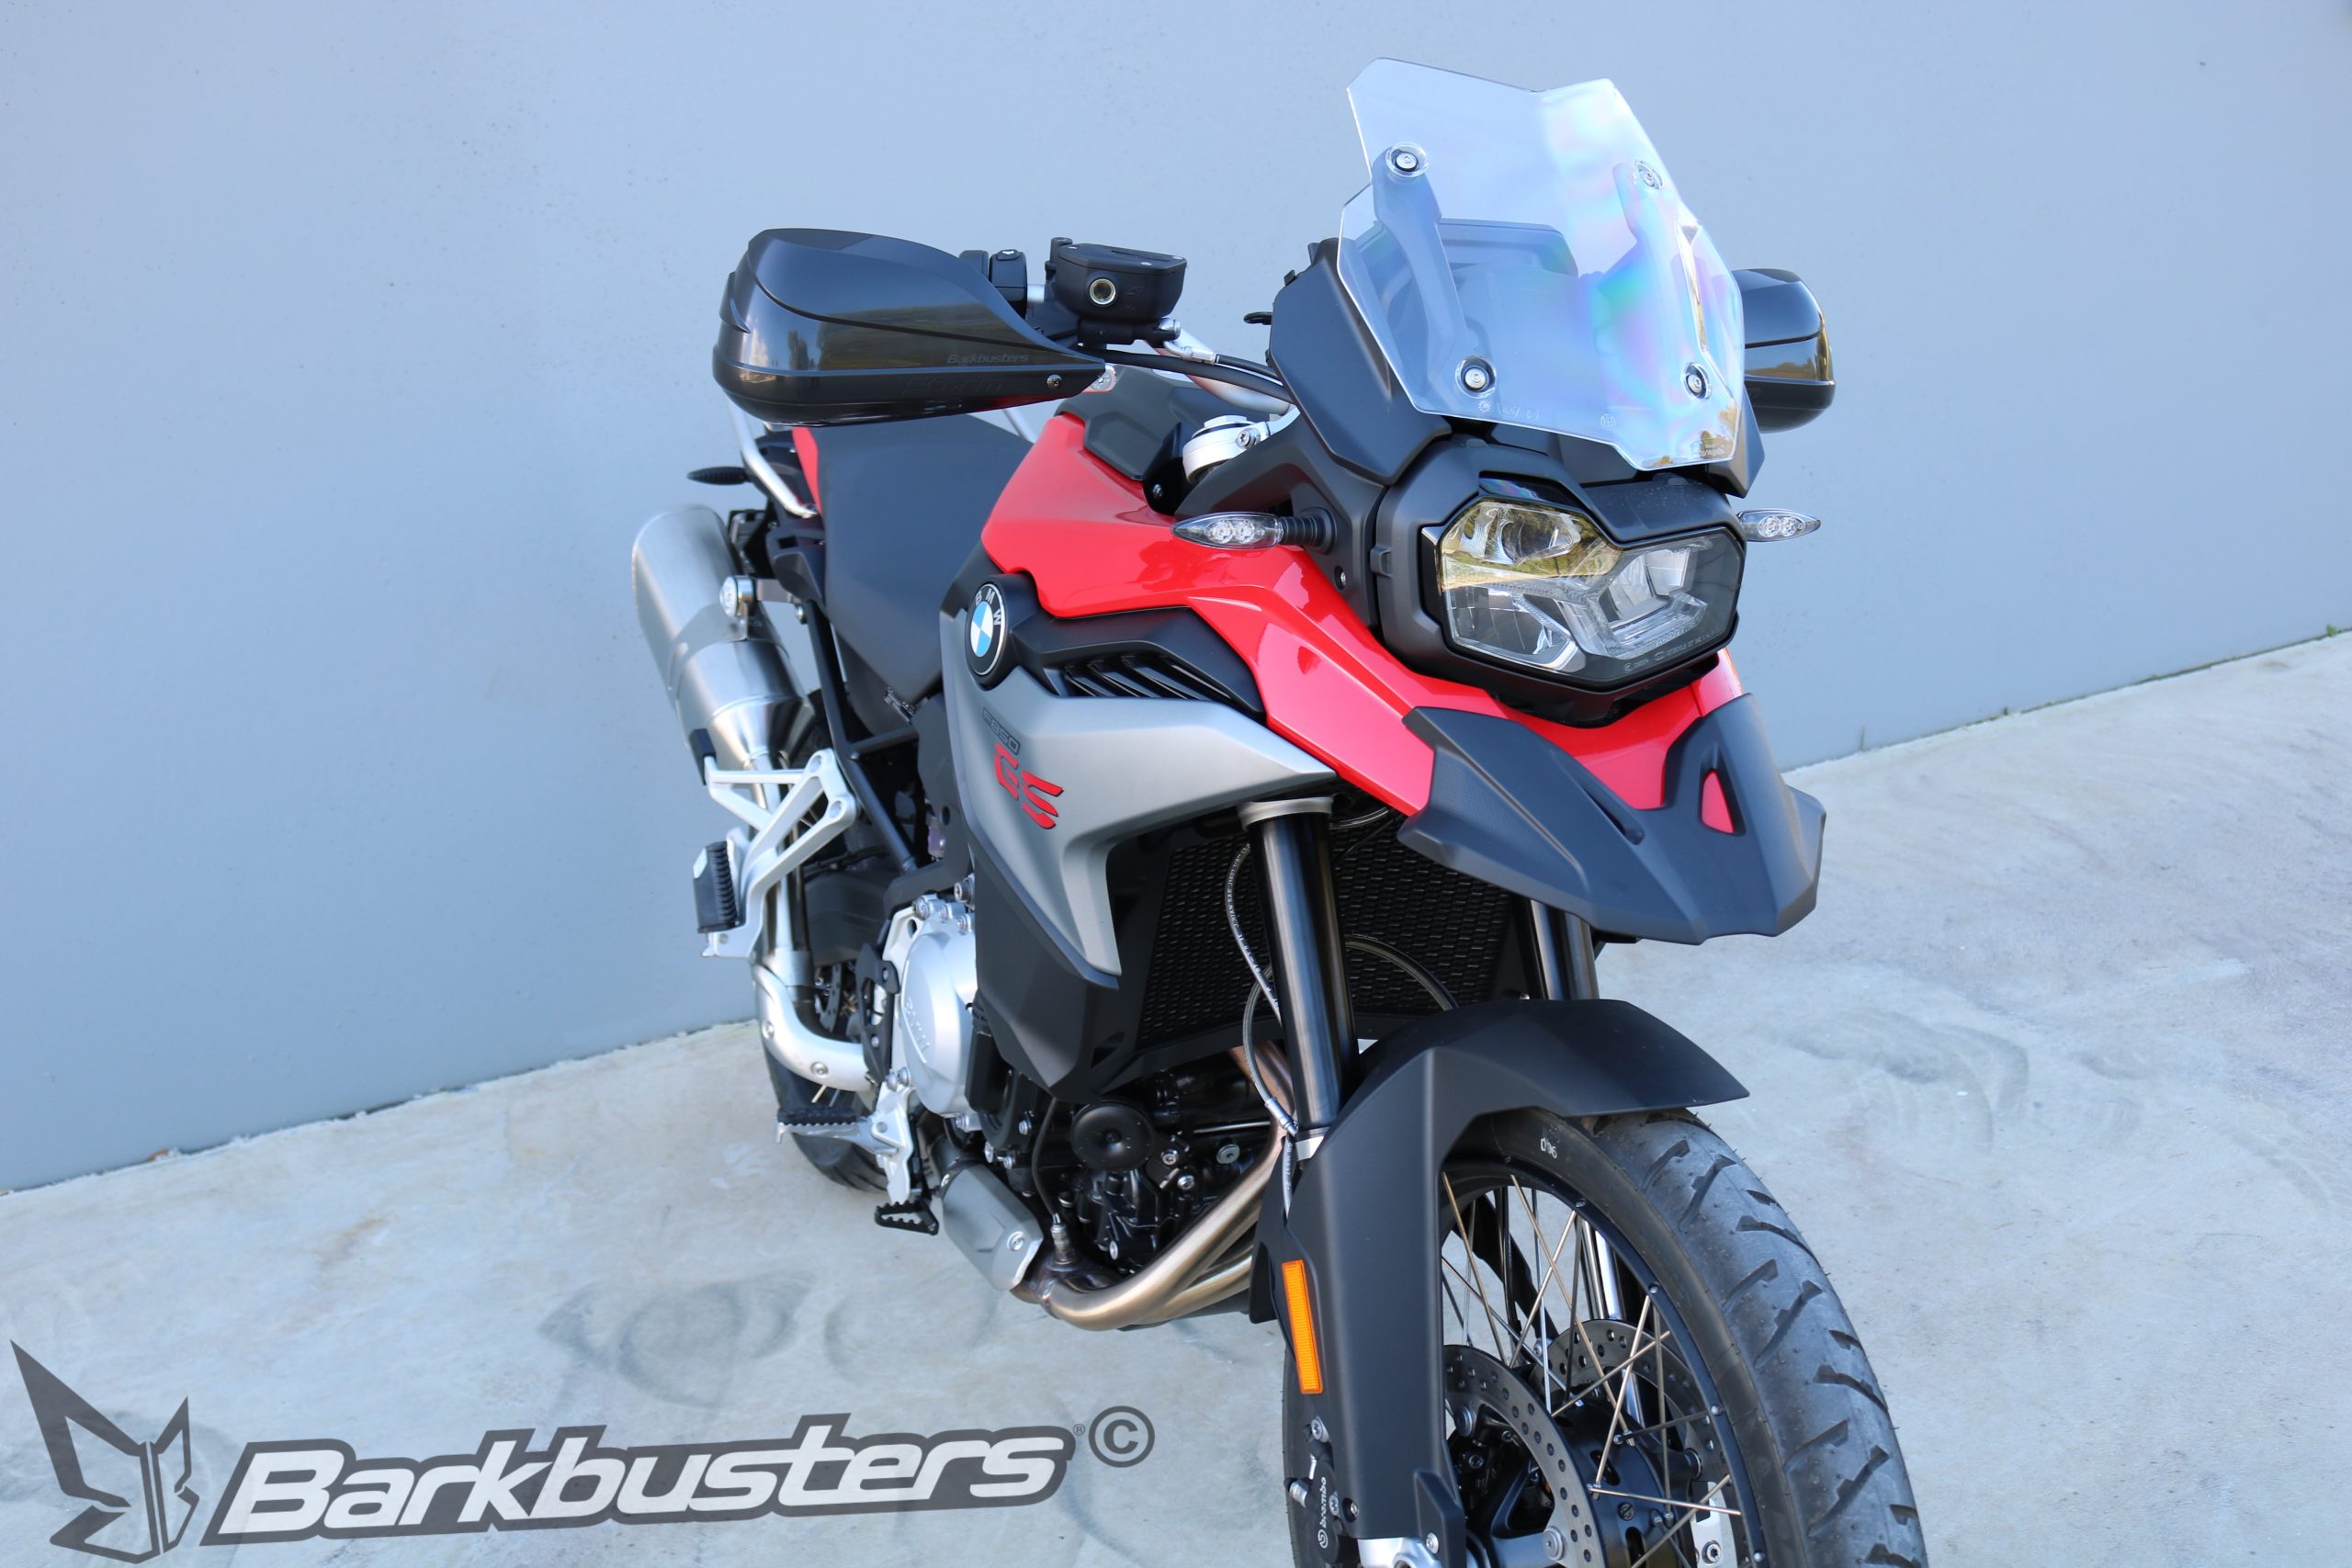 BARKBUSTERS Handguard Hardware Kit (Code: BHG-085) fitted to BMW F850GS with STORM guards (Code: STM-003) sold separately